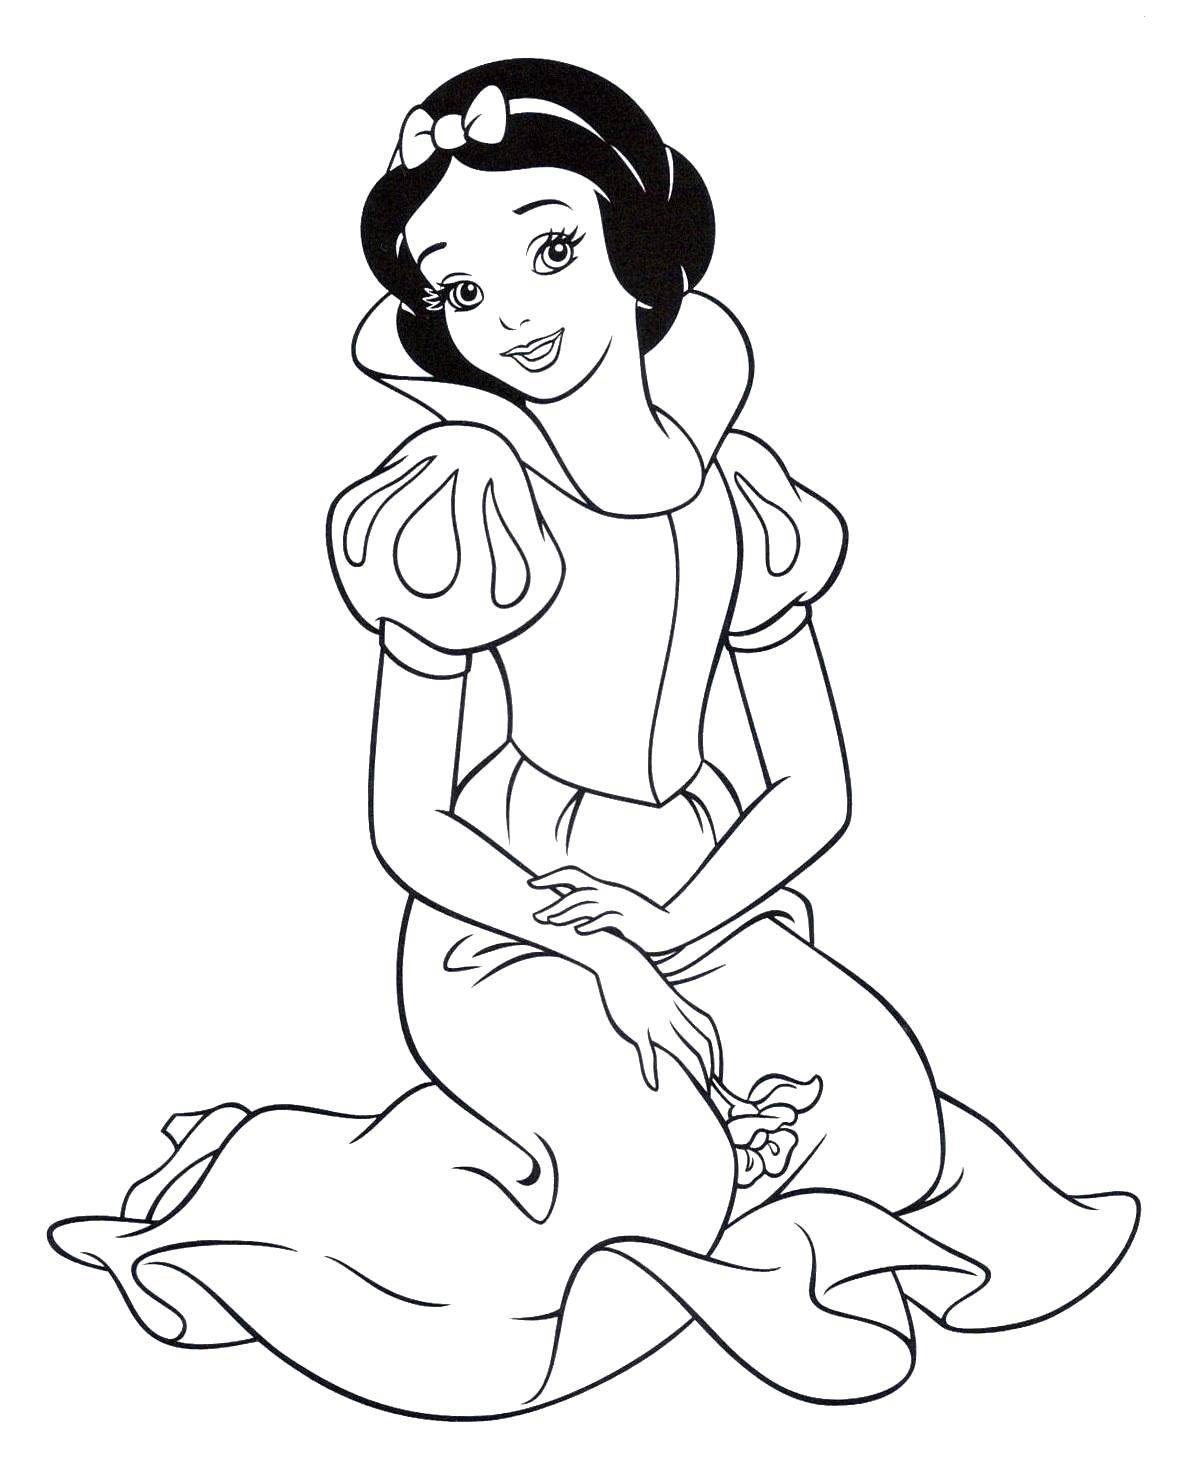 Coloring Snow white. Category Disney coloring pages. Tags:  Disney, Snow White.